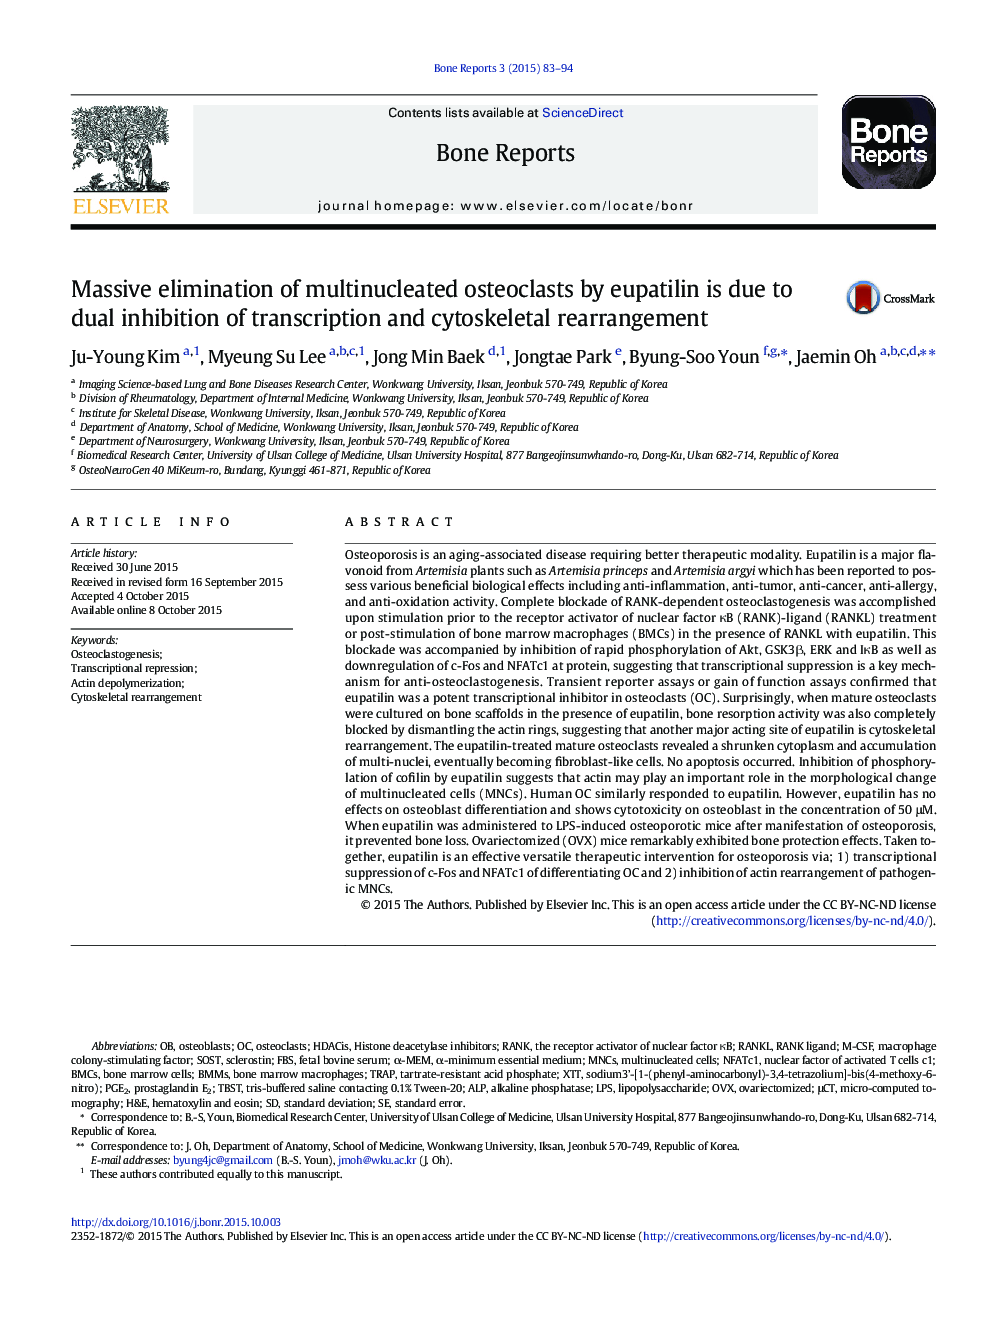 Massive elimination of multinucleated osteoclasts by eupatilin is due to dual inhibition of transcription and cytoskeletal rearrangement